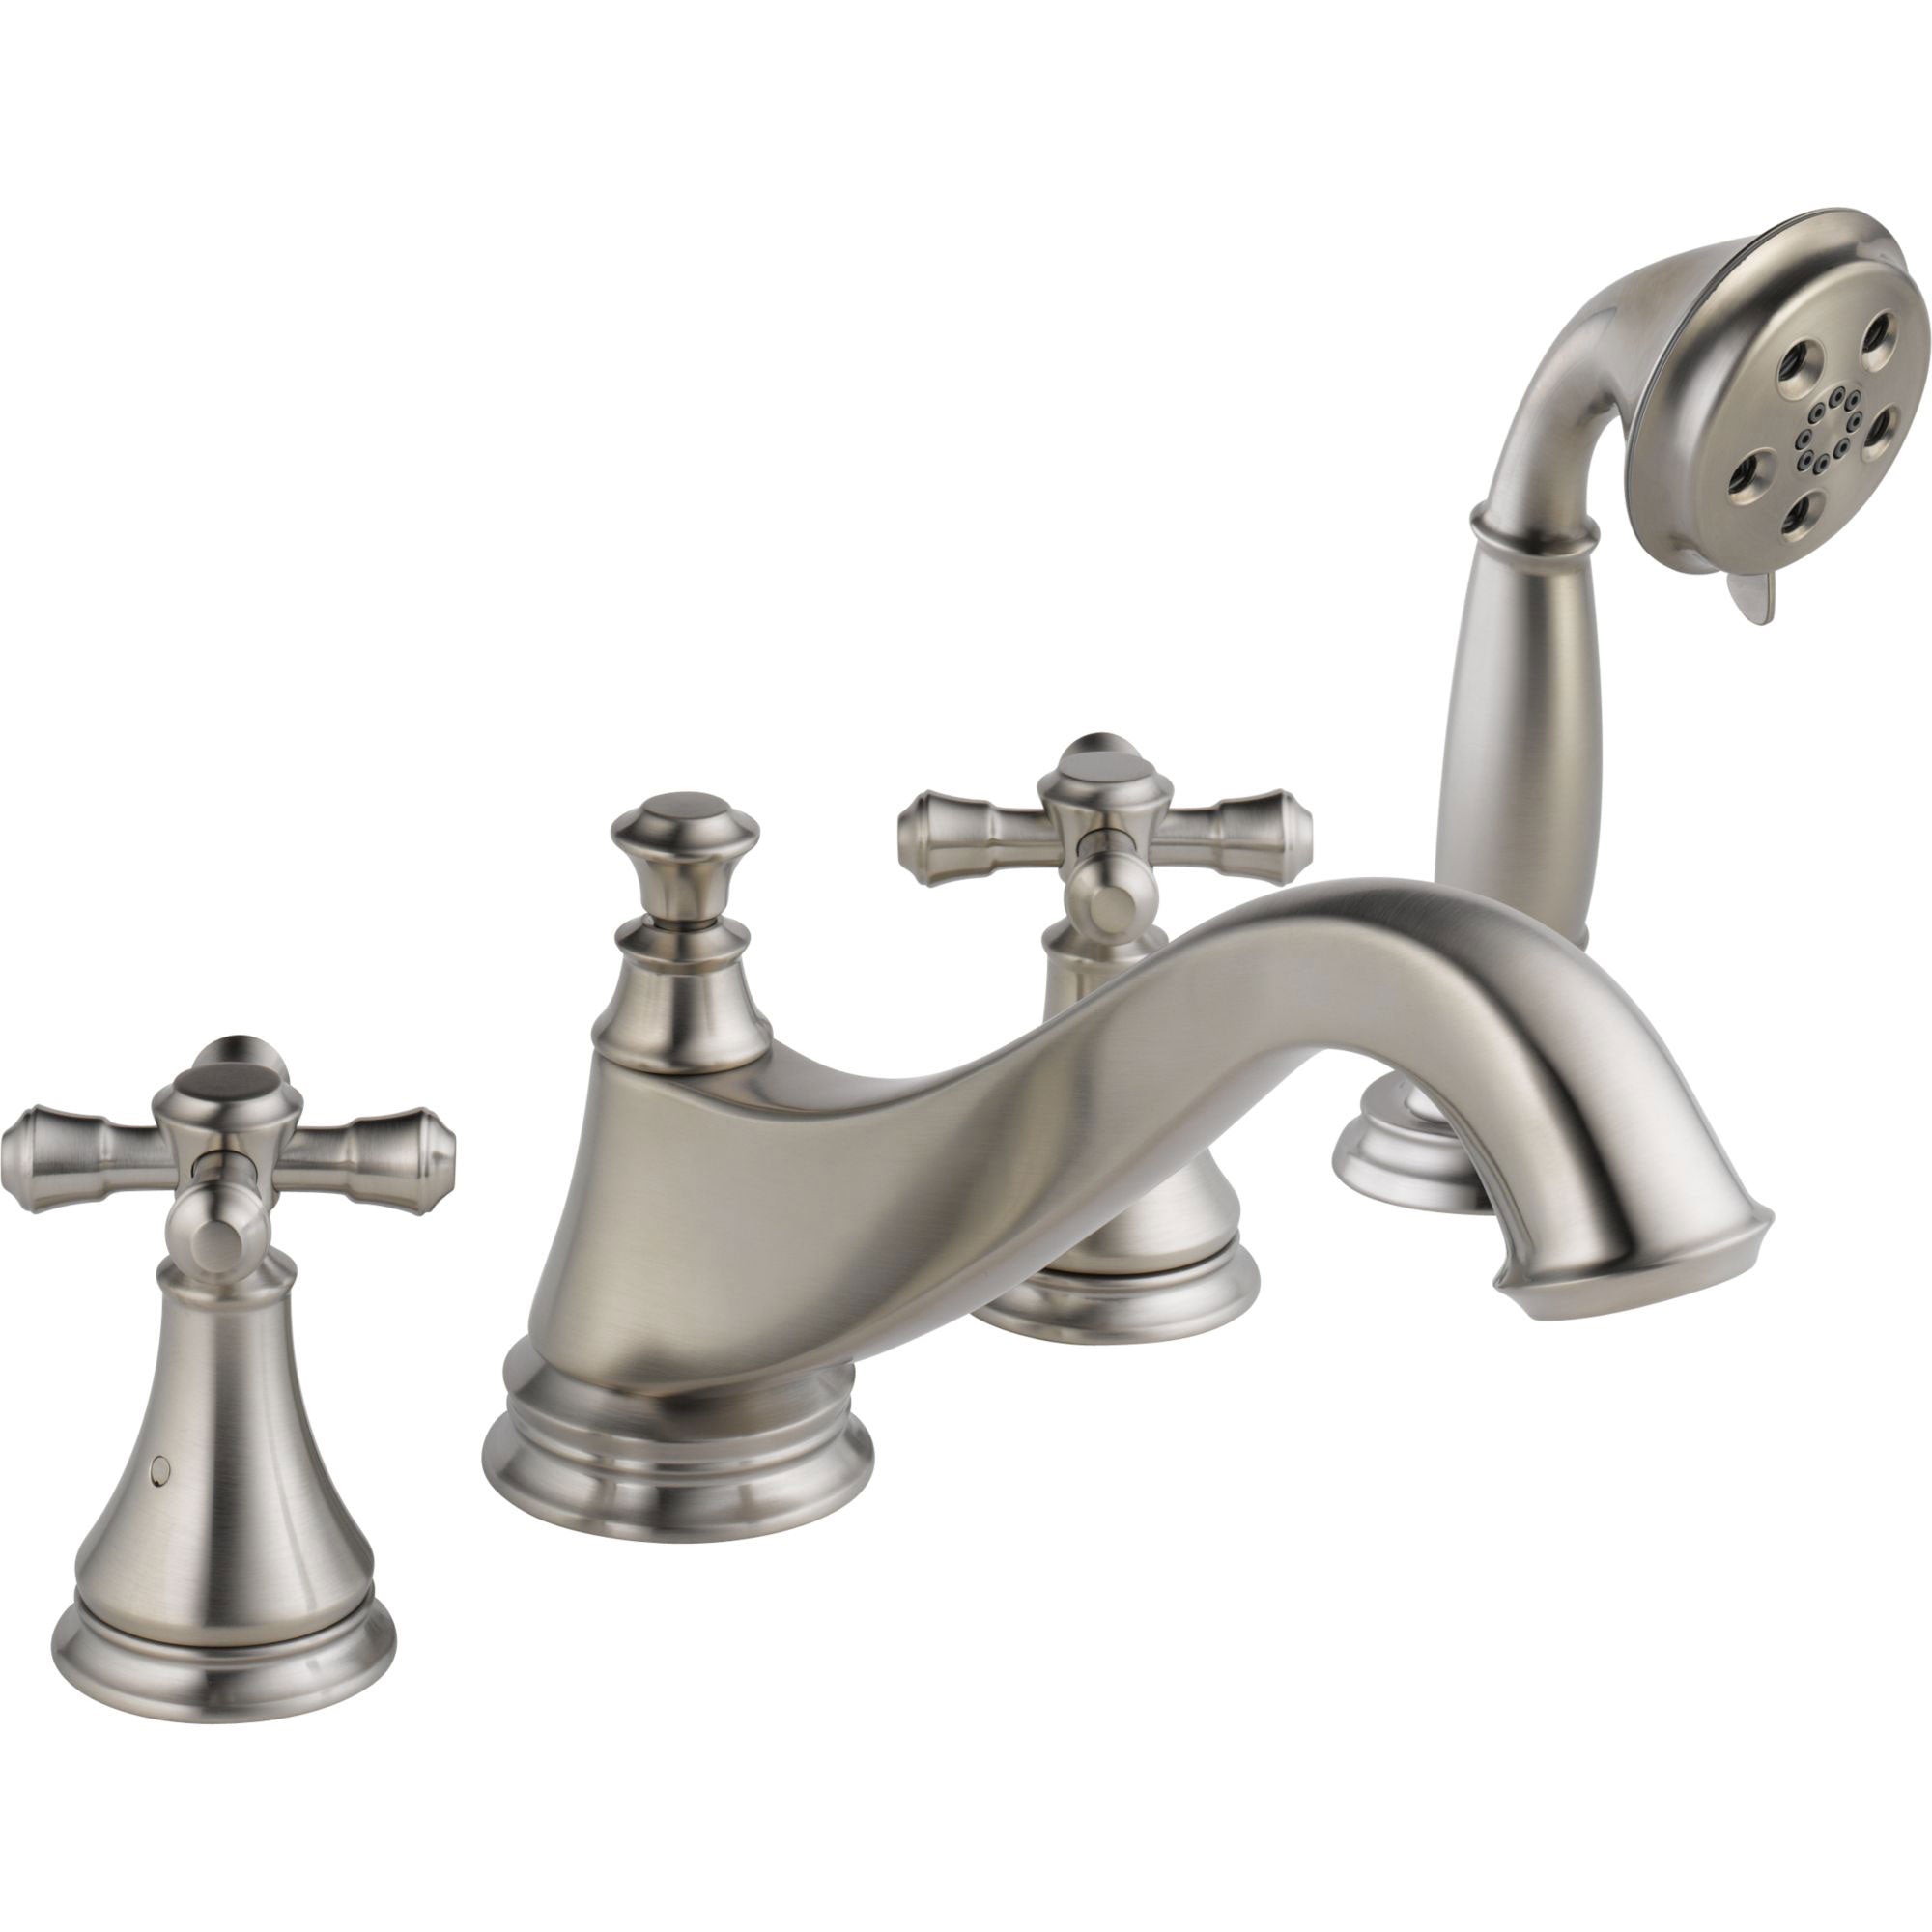 Delta Cassidy Stainless Steel Finish Low Arc Spout Roman Tub Filler Faucet with Hand Shower Spray INCLUDES Valve and Cross Handles D1068V